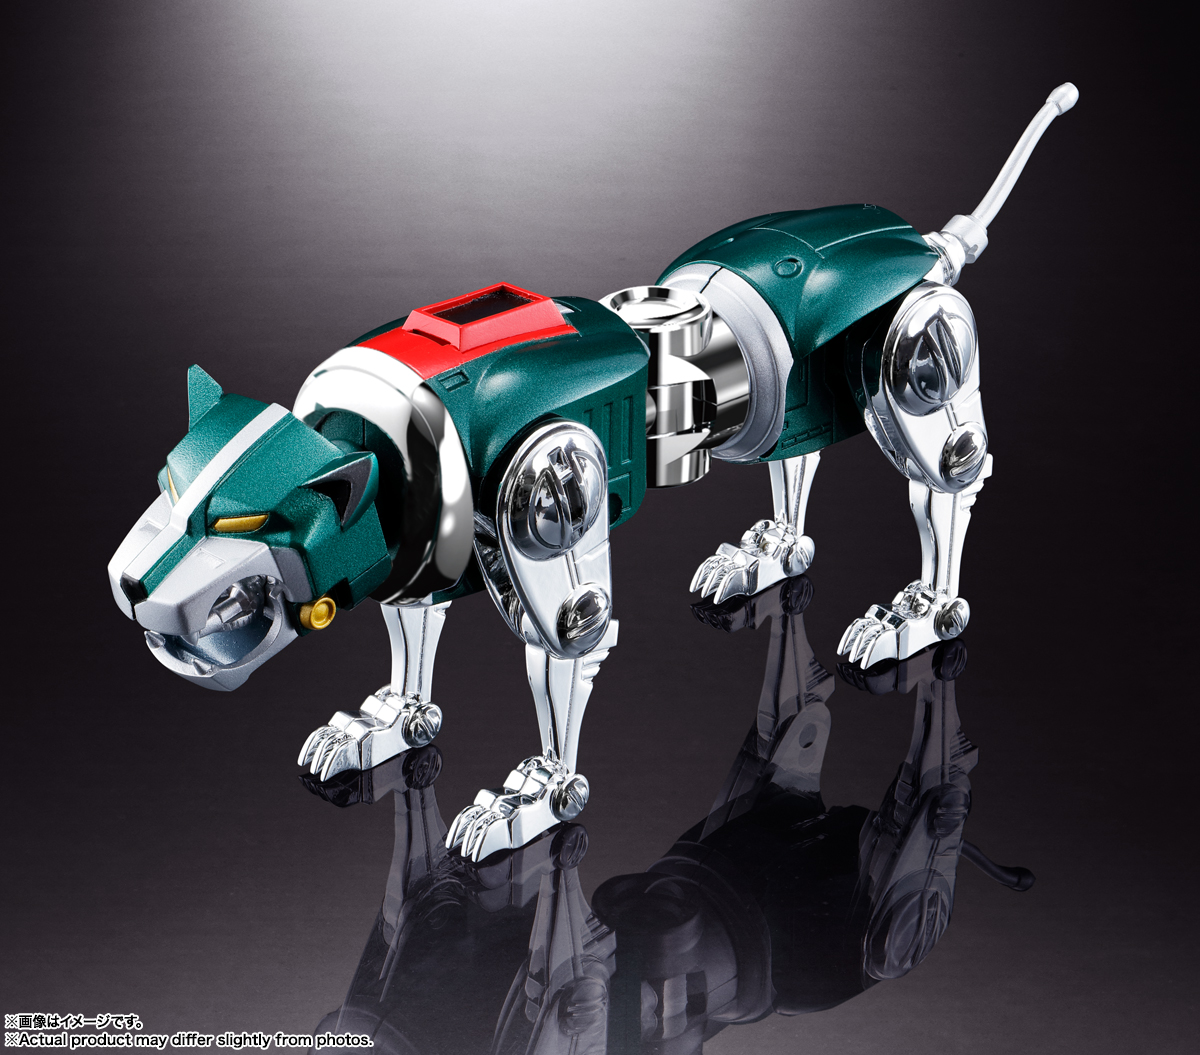 voltron-gx-71sp-voltron-chogokin-action-figure-50th-anniversary-ver image count 5